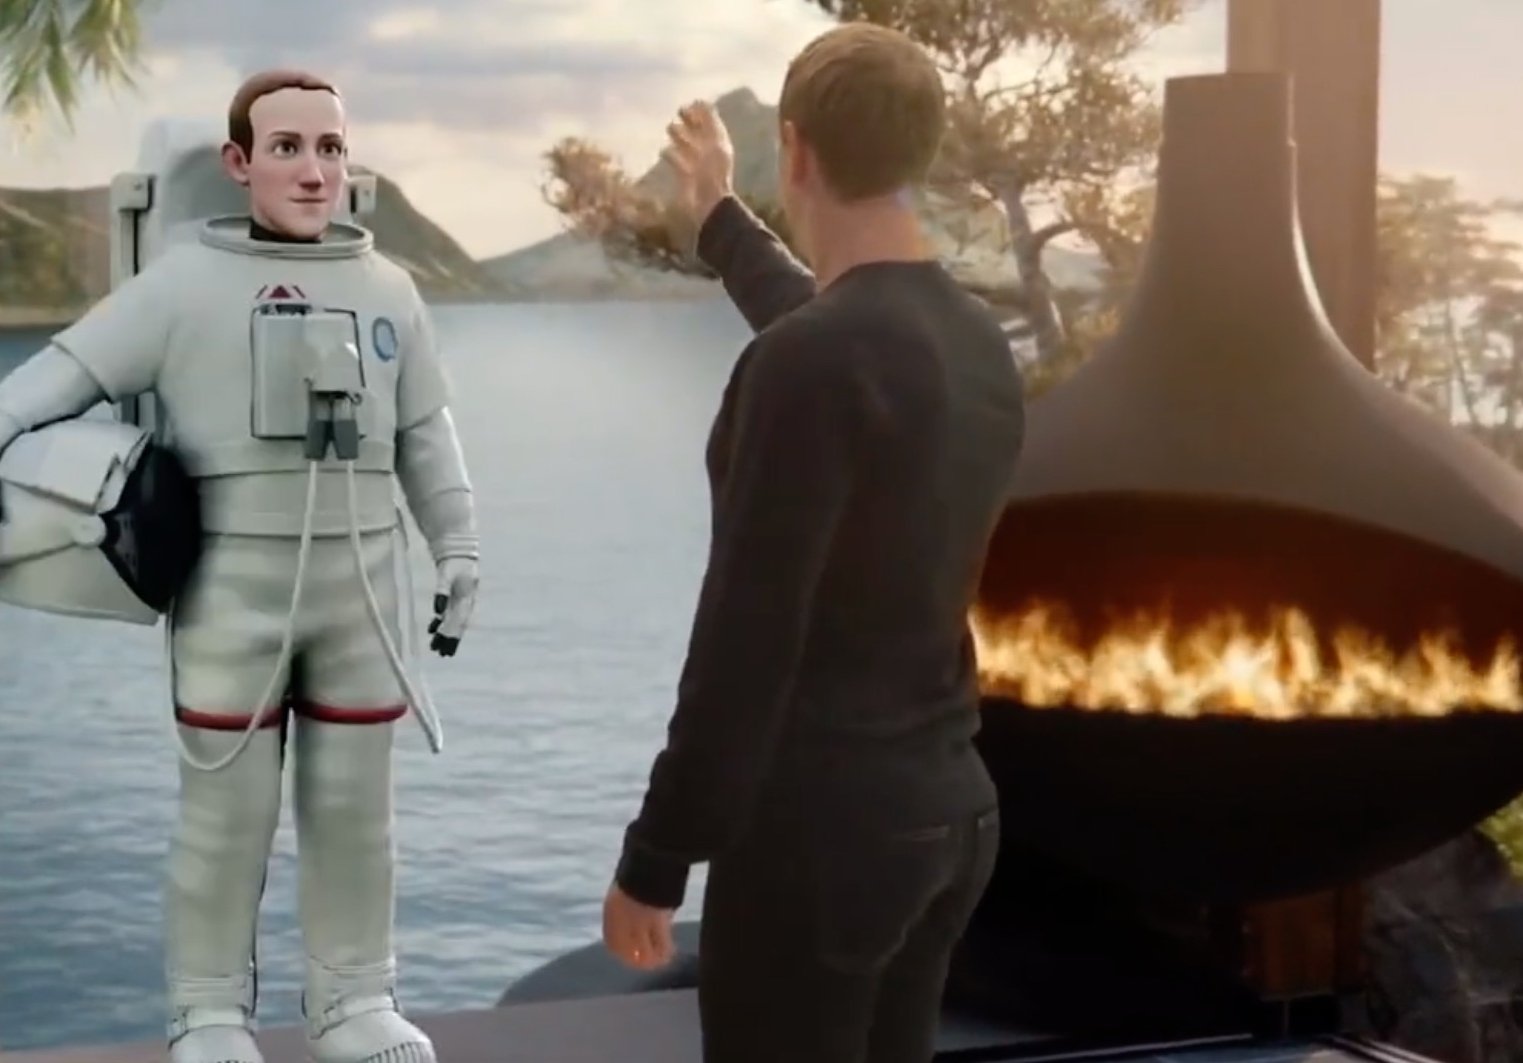 Facebook CEO Mark Zuckerberg is seen playing as an astronaut in the Metaverse during a live-streamed virtual and augmented reality conference to announce the rebrand of Facebook as Meta, in this screengrab taken from a video released Oct. 28, 2021. (Reuters Photo)